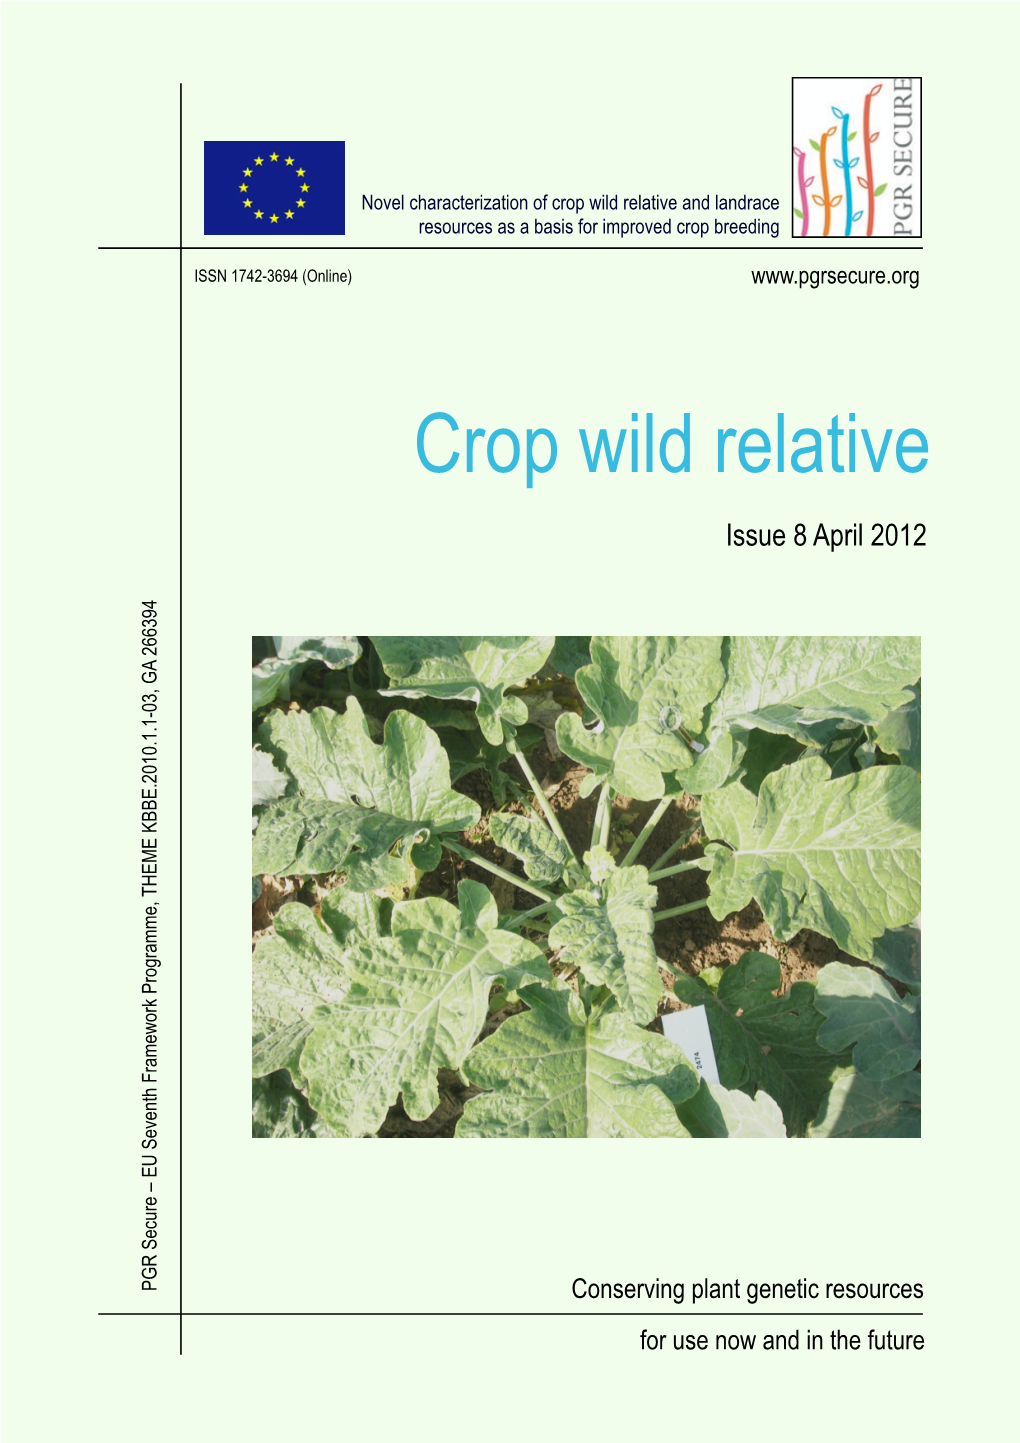 Crop Wild Relative and Landrace Resources As a Basis for Improved Crop Breeding